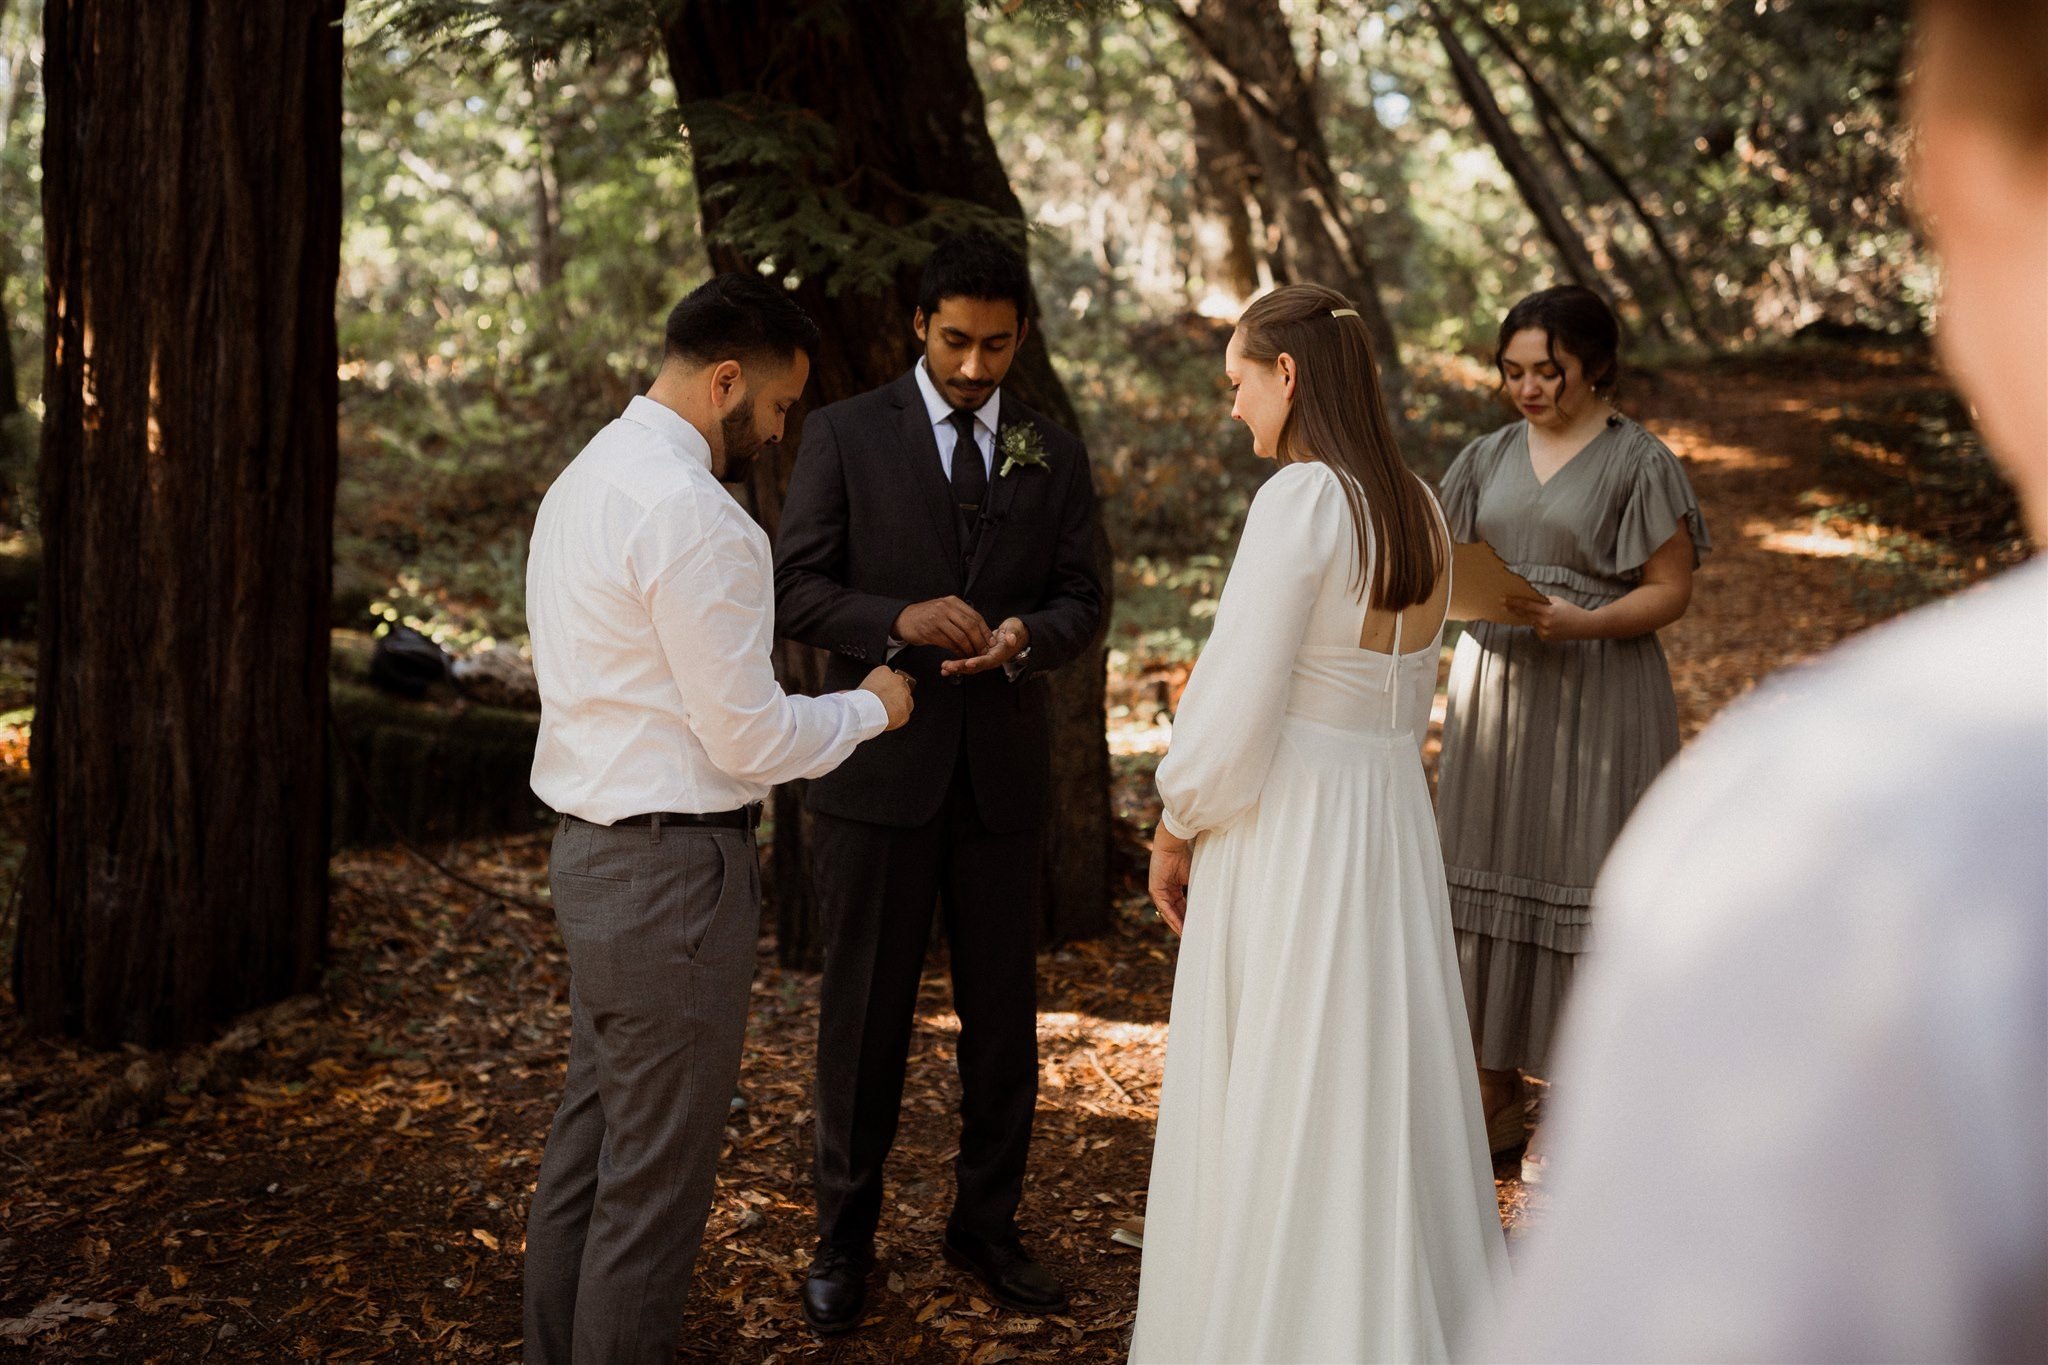 044_Two-Day Big Sur Redwoods Elopement with Family_Will Khoury Elopement Photographer.jpg